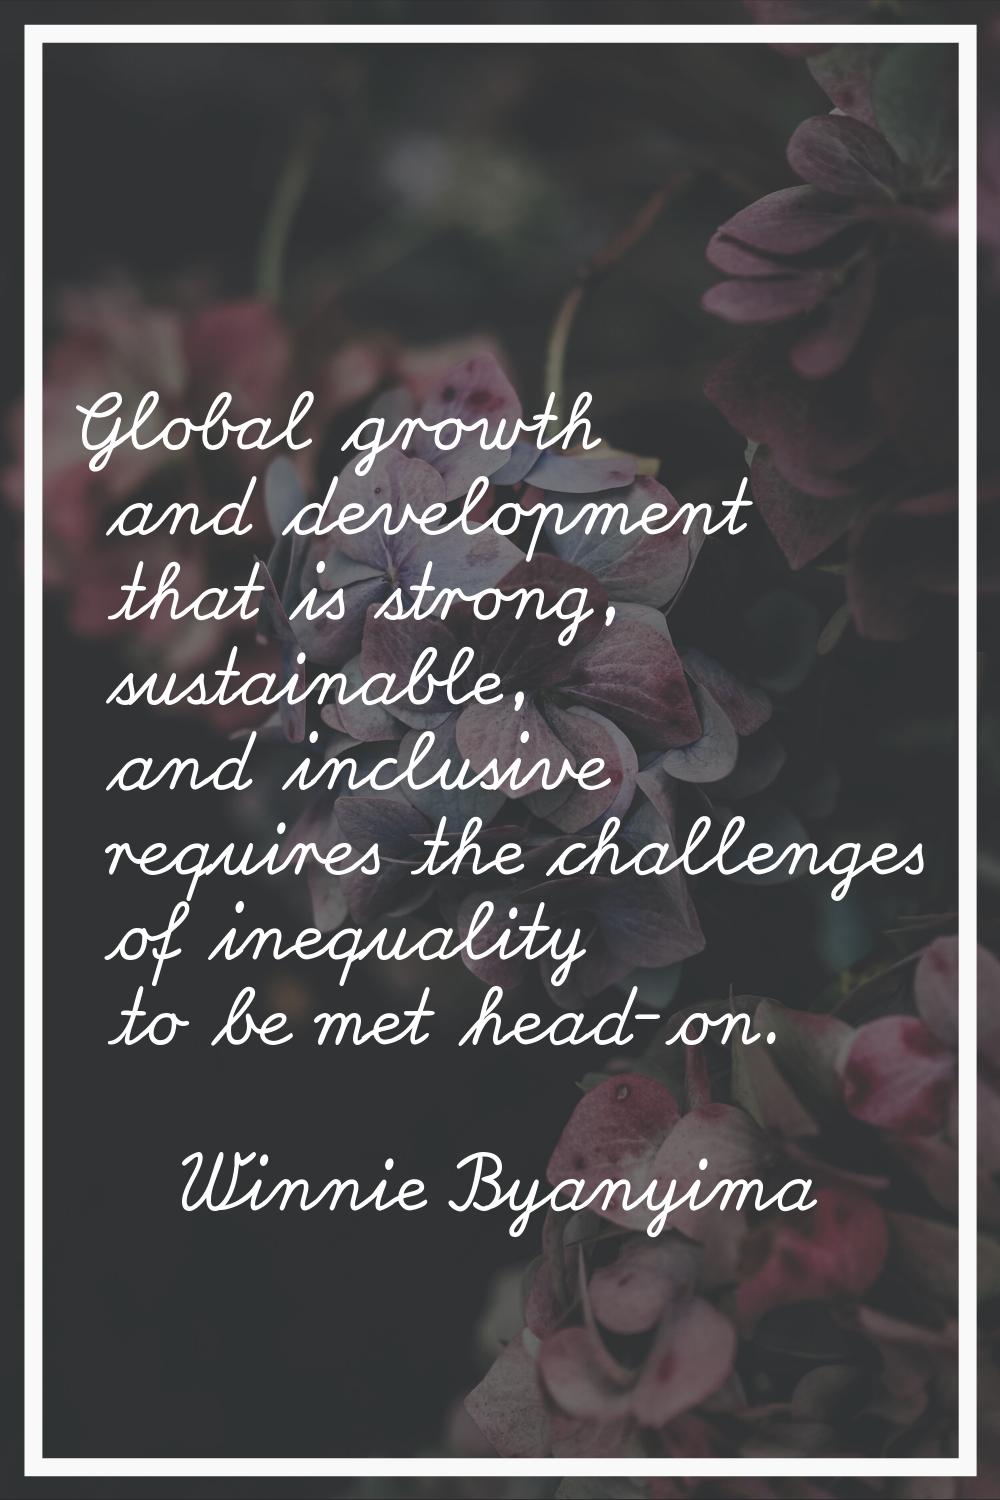 Global growth and development that is strong, sustainable, and inclusive requires the challenges of